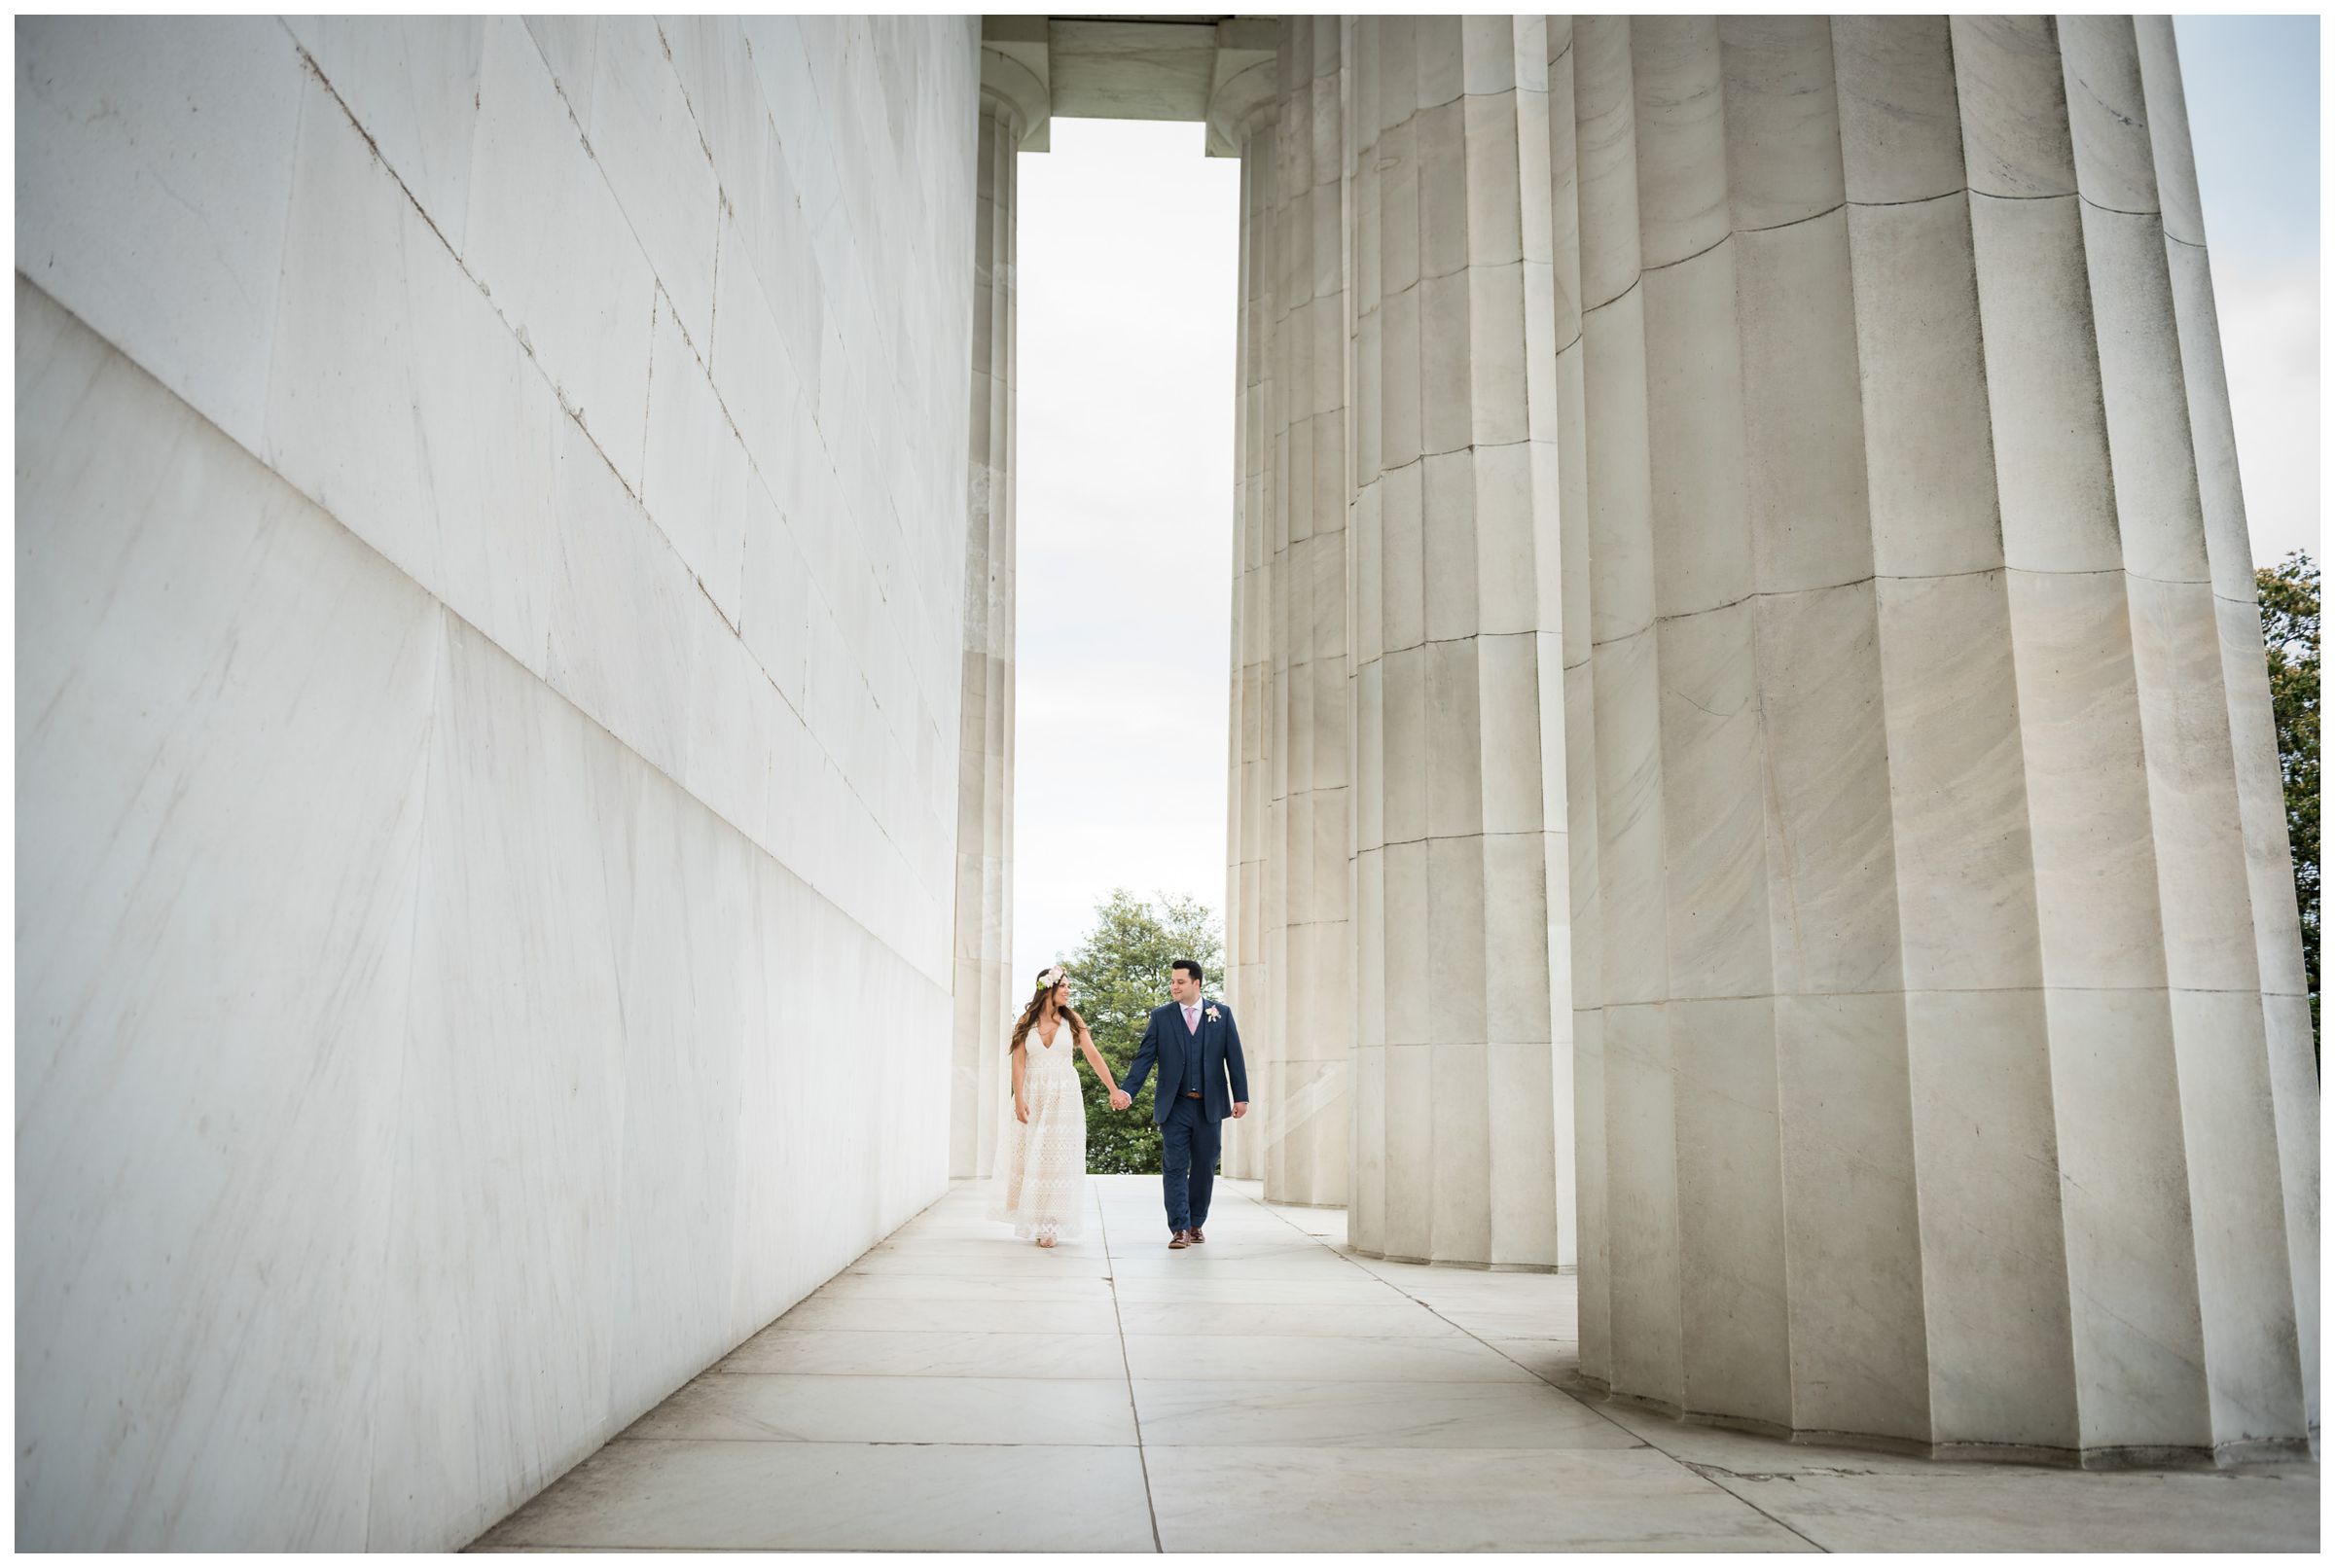 bride and groom portraits at Lincoln Memorial during DC monument wedding day in Washington